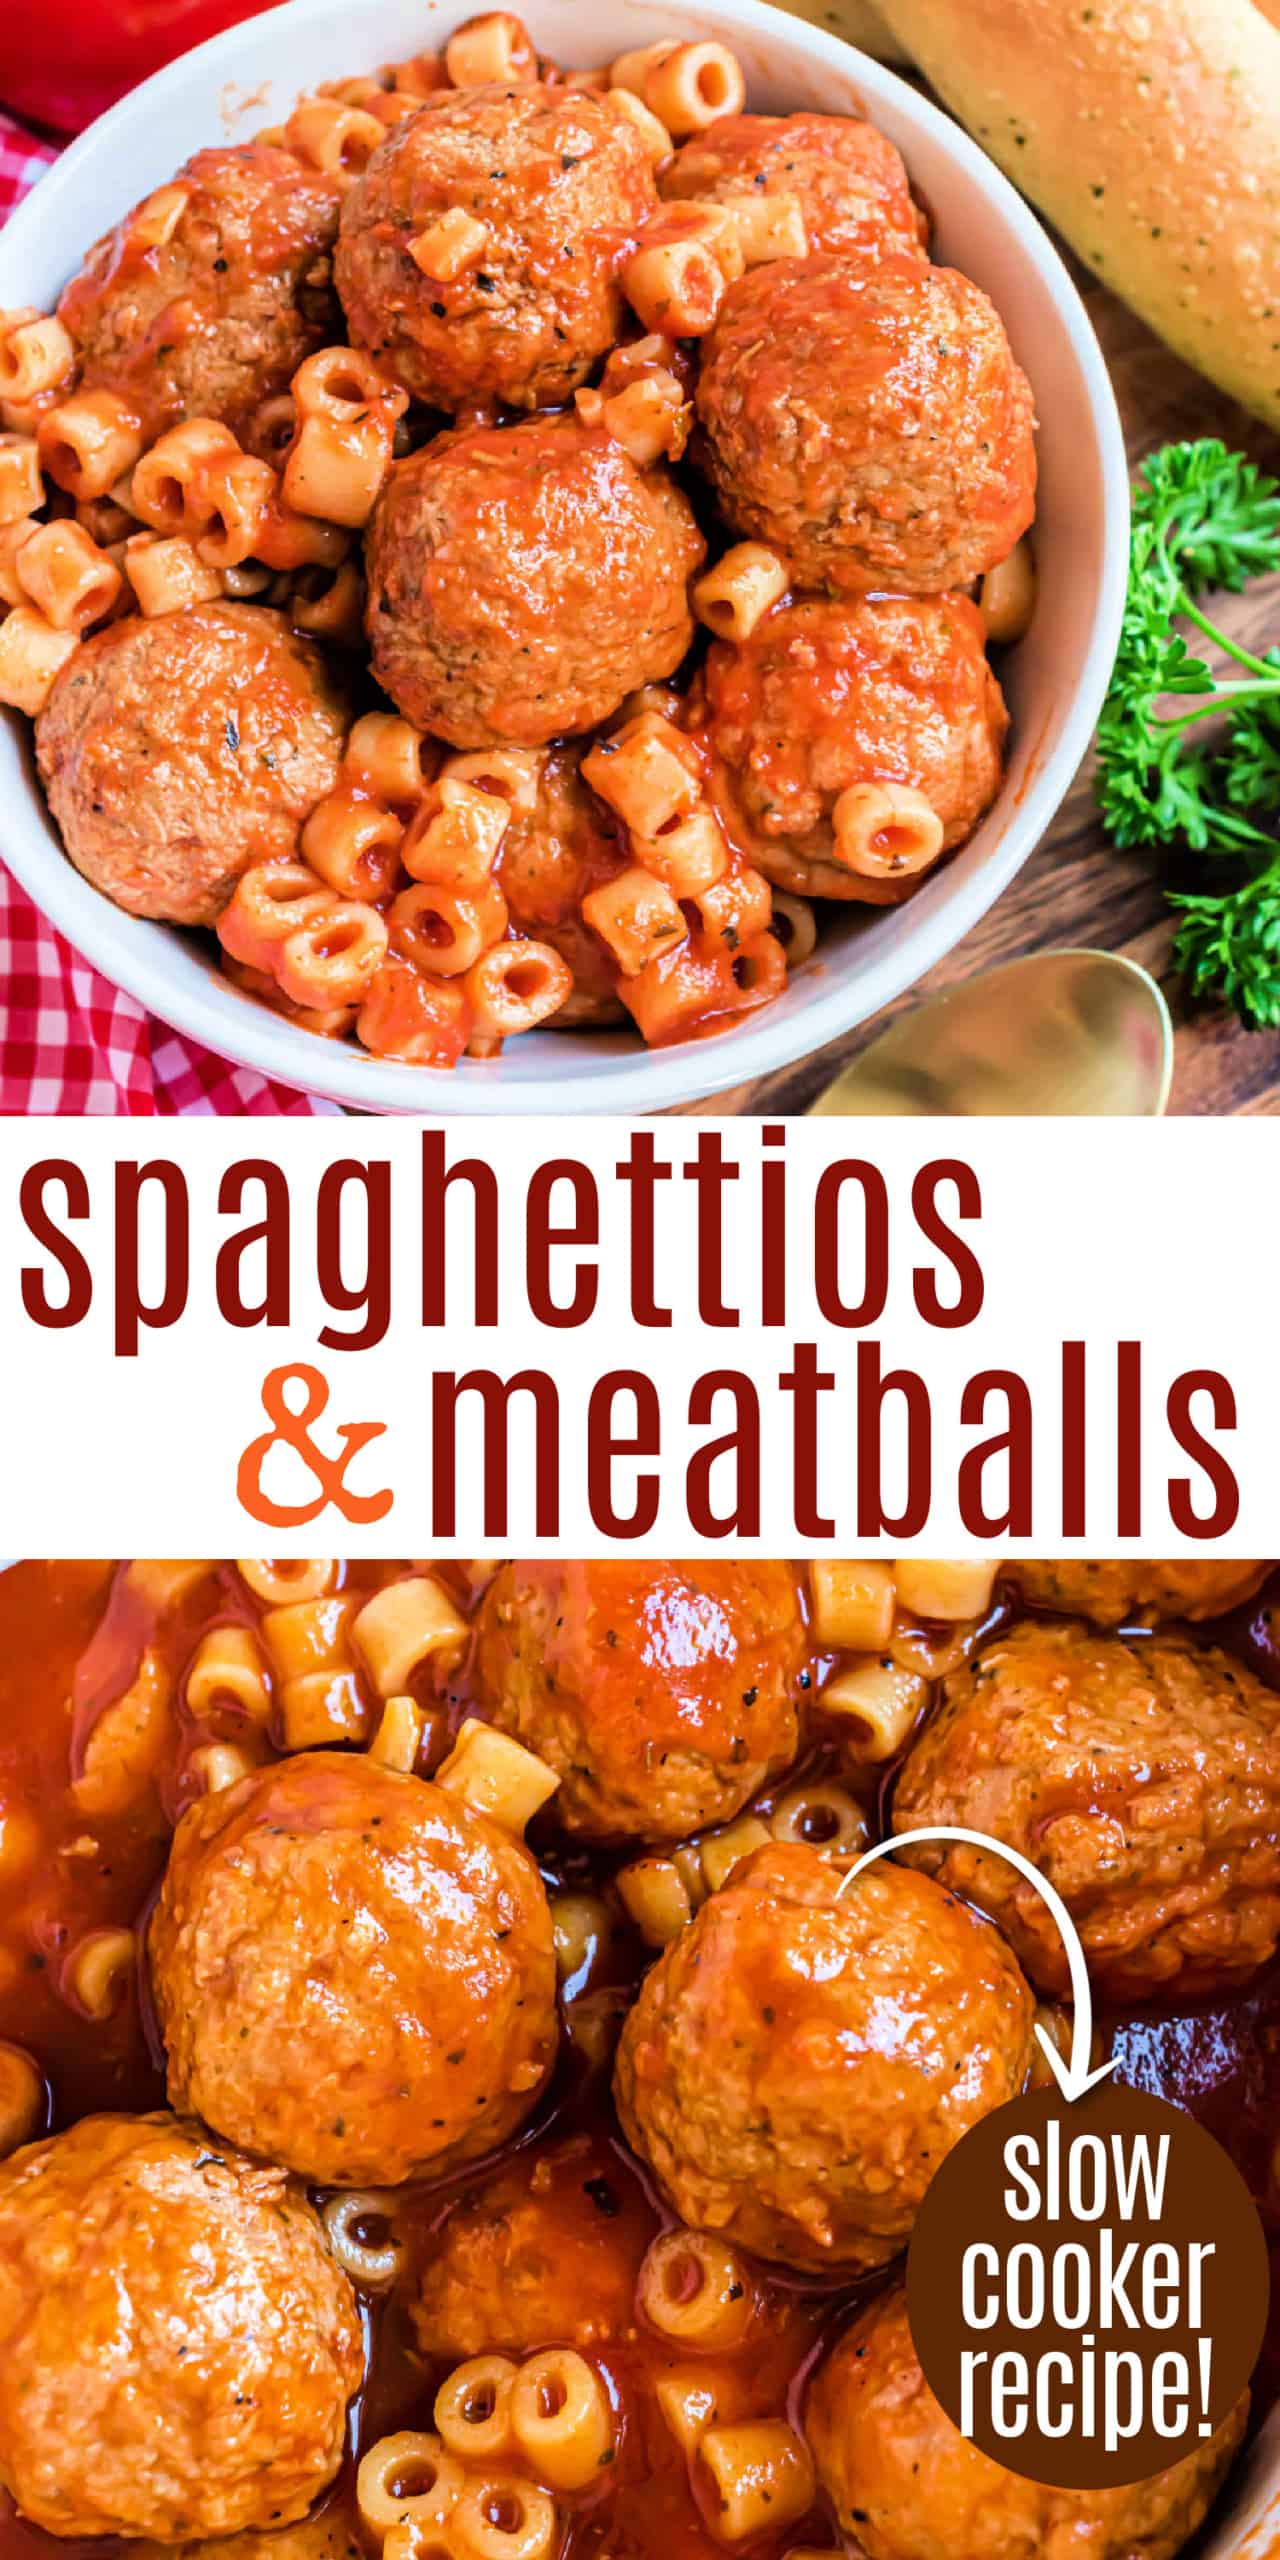 https://www.shugarysweets.com/wp-content/uploads/2019/05/spaghettios-and-meatballs-pin-scaled.jpg